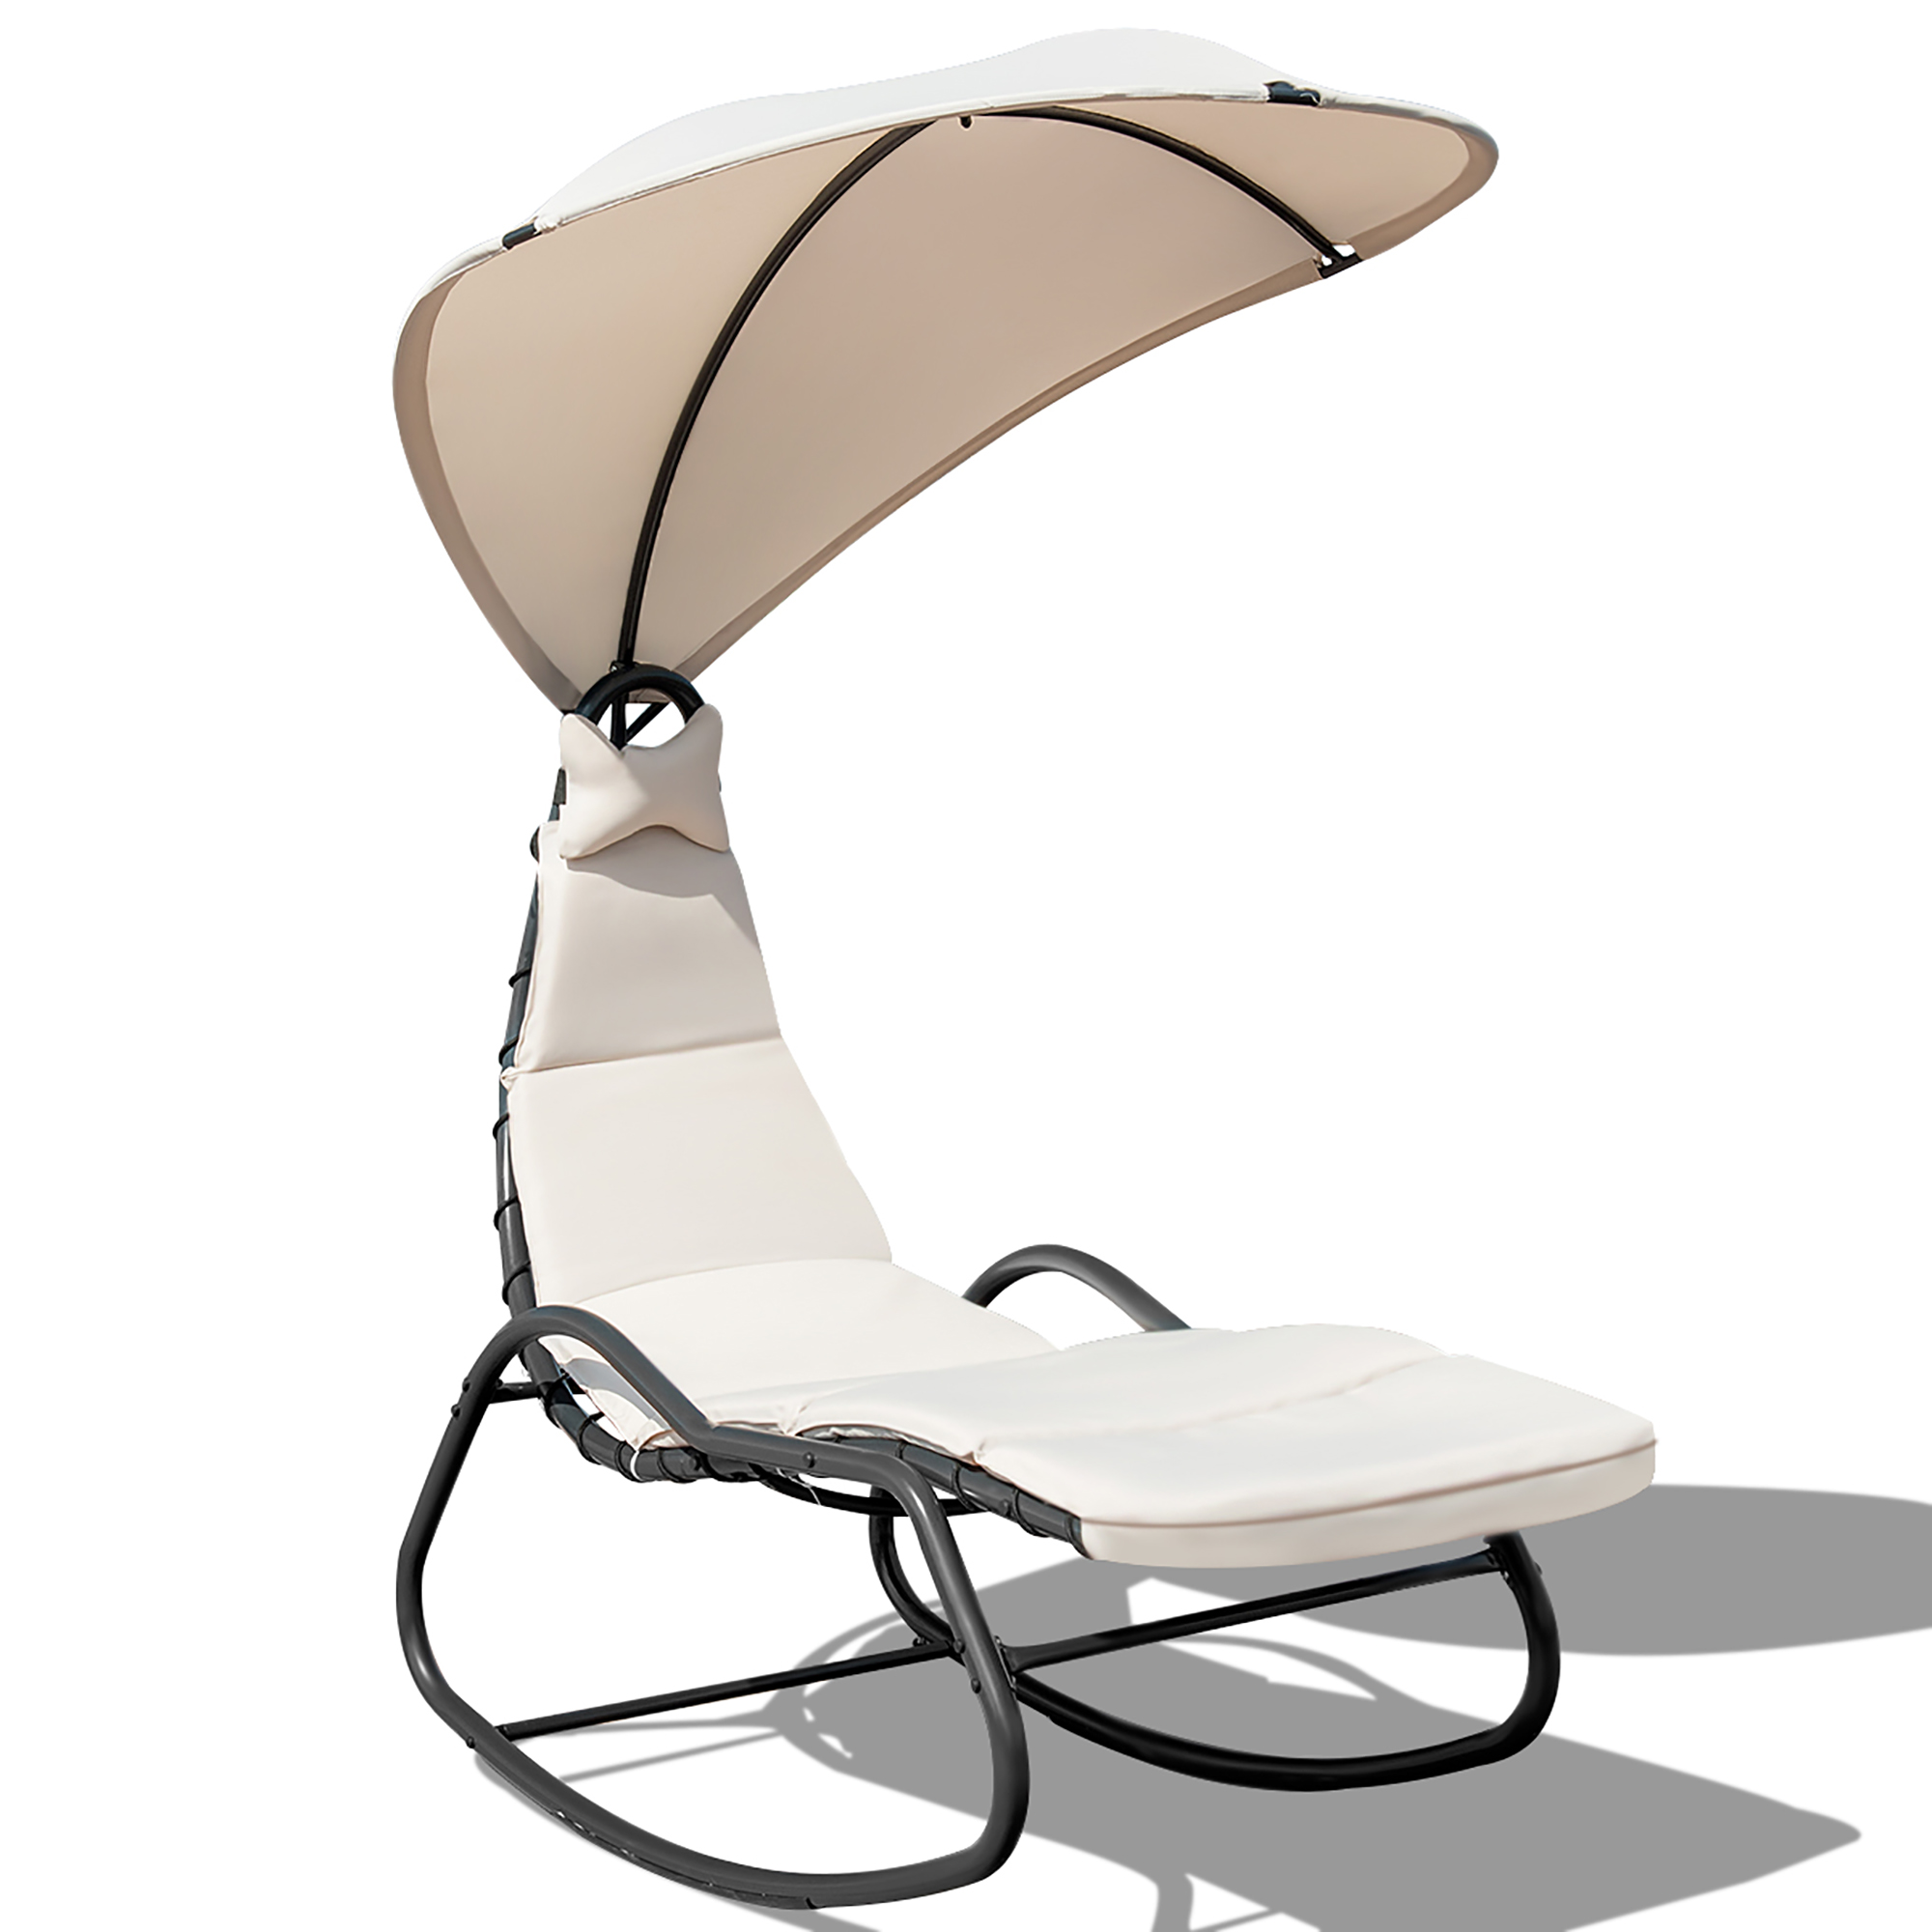 Costway  Patio Hanging Chaise Lounge Swing Canopy Cushion Beige - image 1 of 8